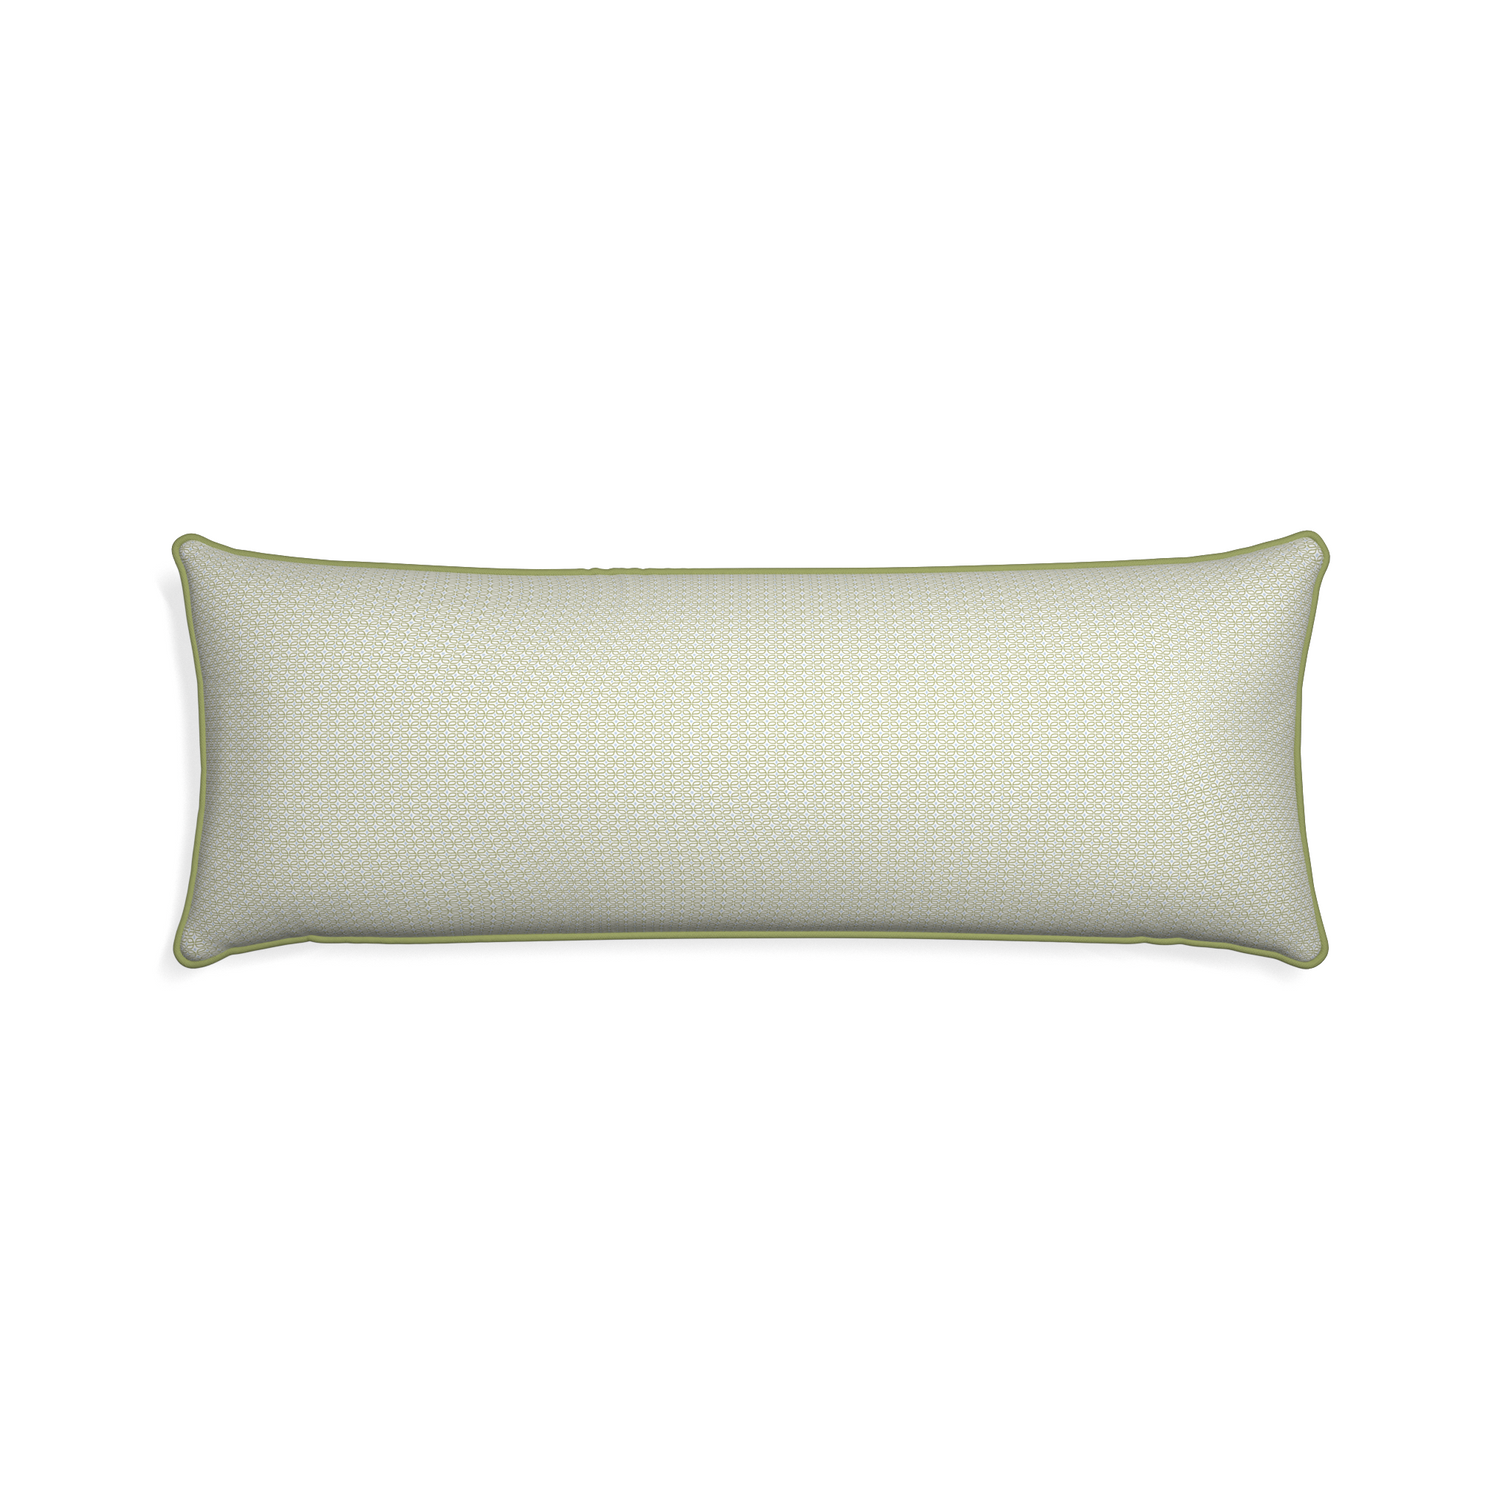 Xl-lumbar loomi moss custom moss green geometricpillow with moss piping on white background